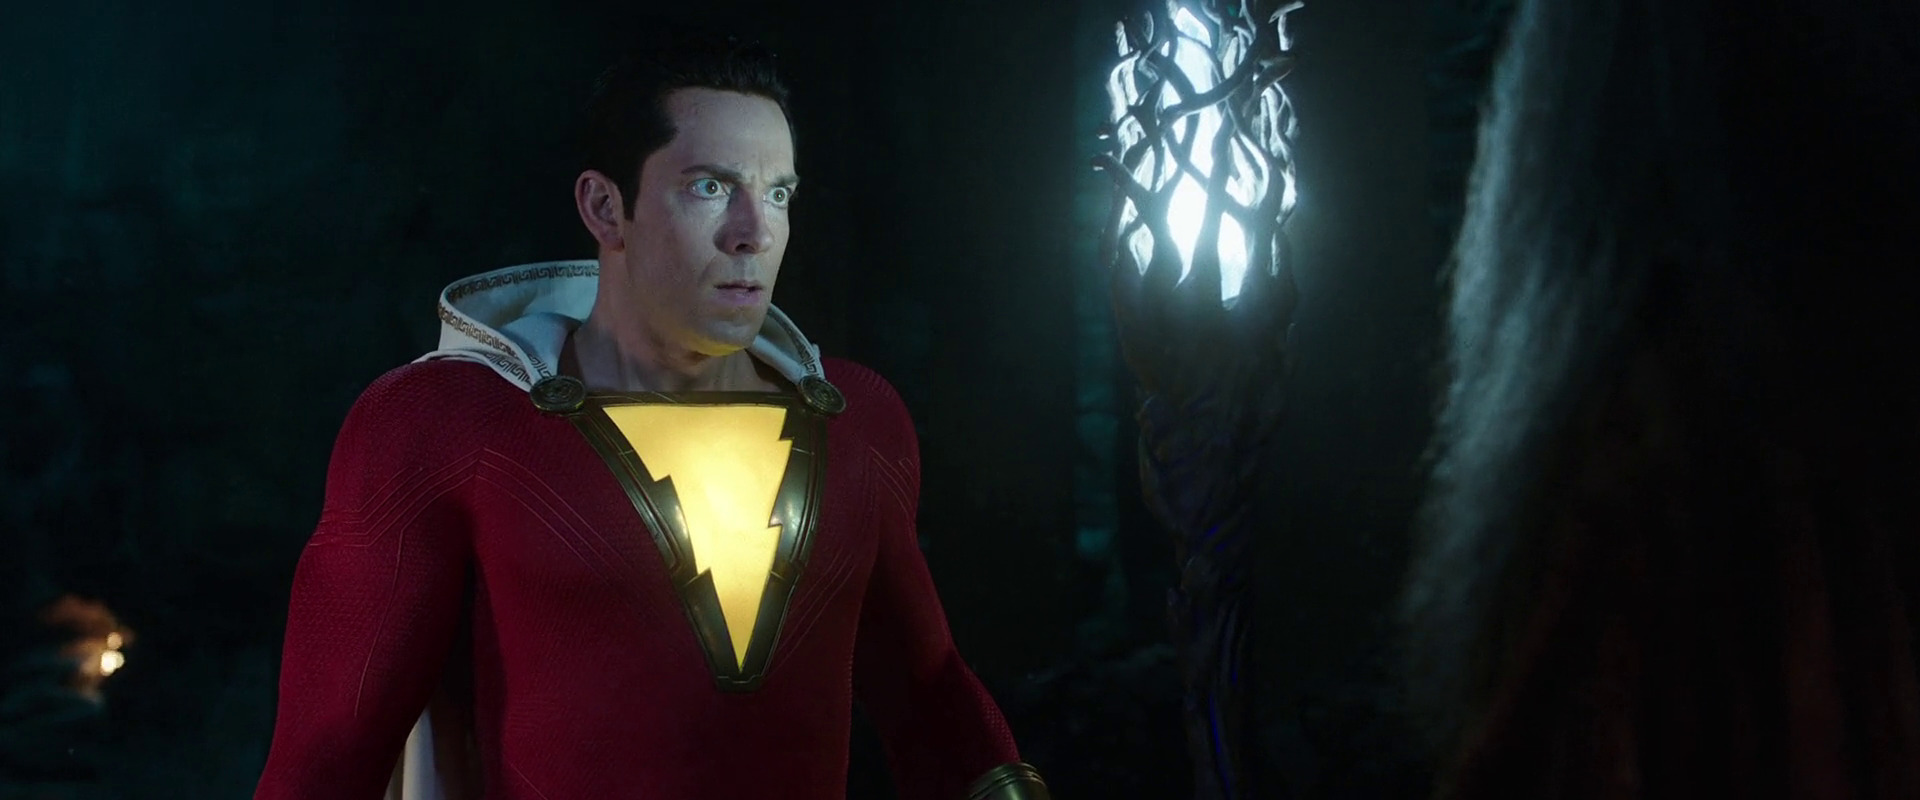 Alleged Shazam! Fury of the Gods Spoilers Reveal Major Cameo And Character Death Into Comics